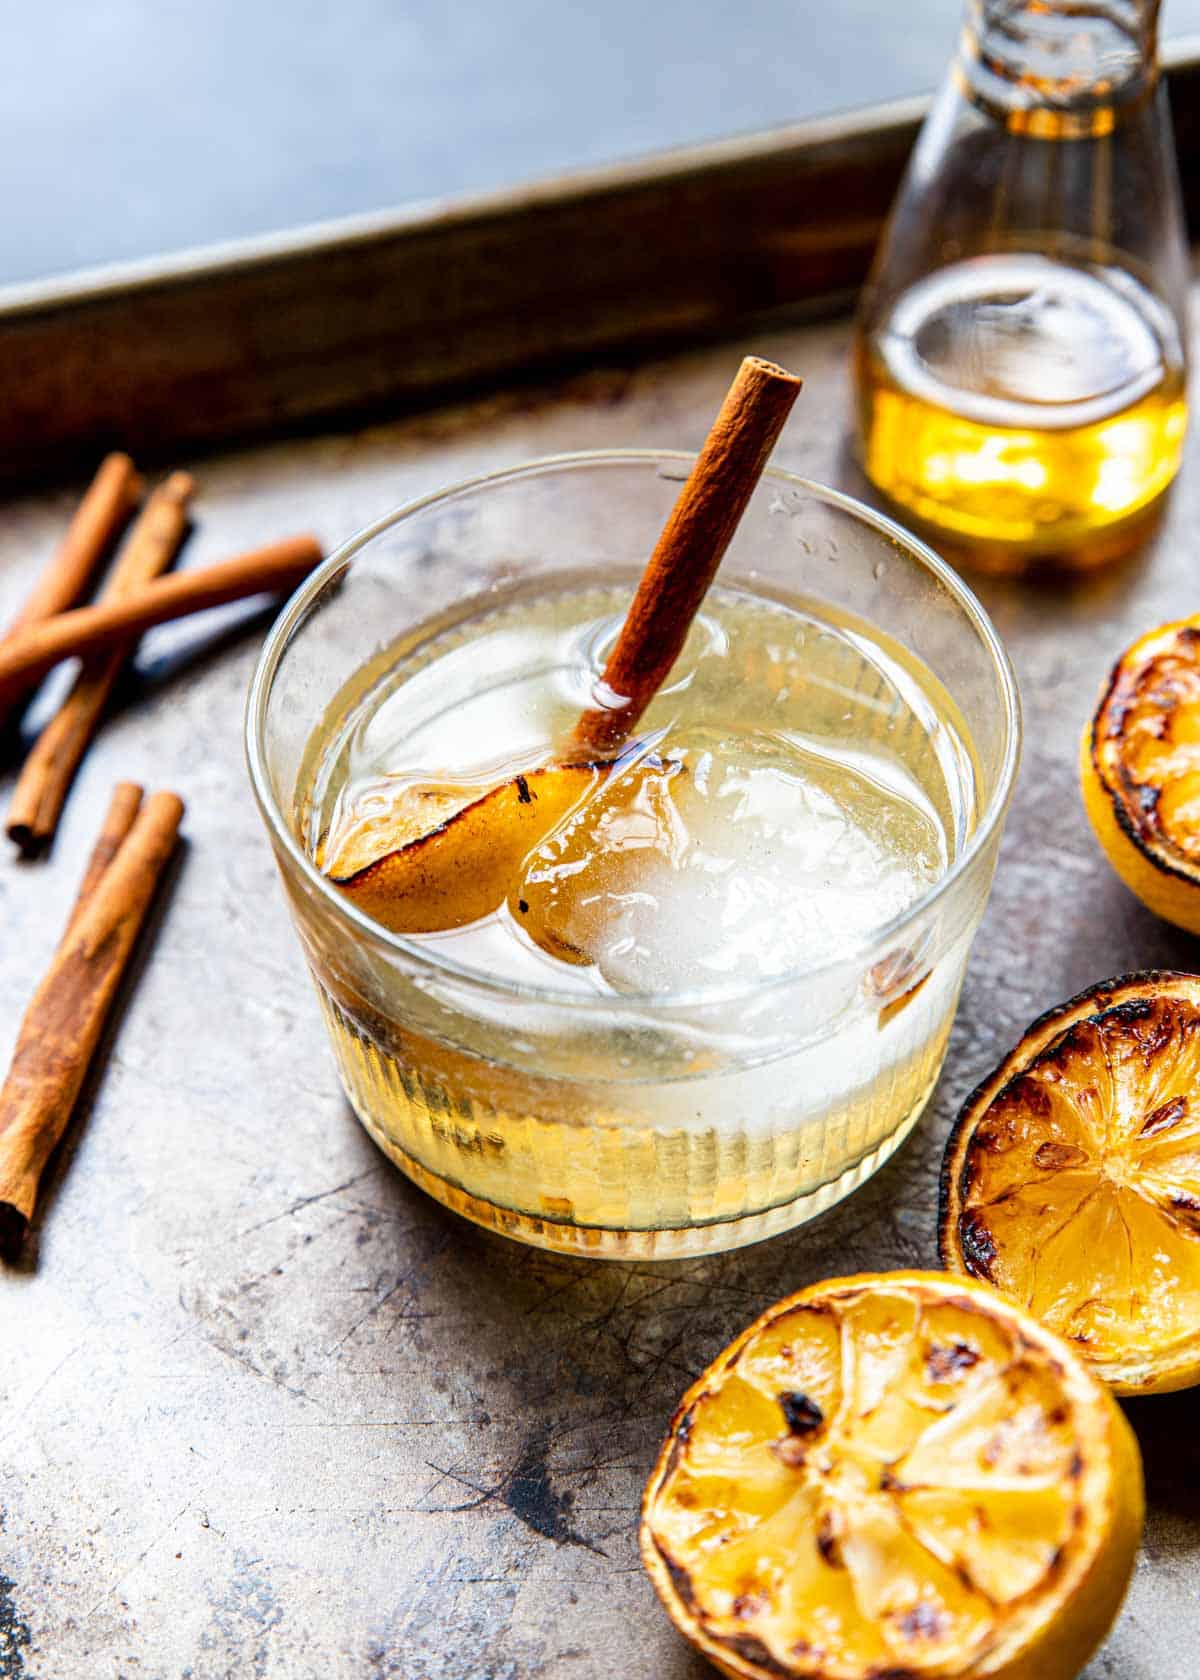 grilled lemon and tequila in a glass with a large ice cube and a cinnamon stick